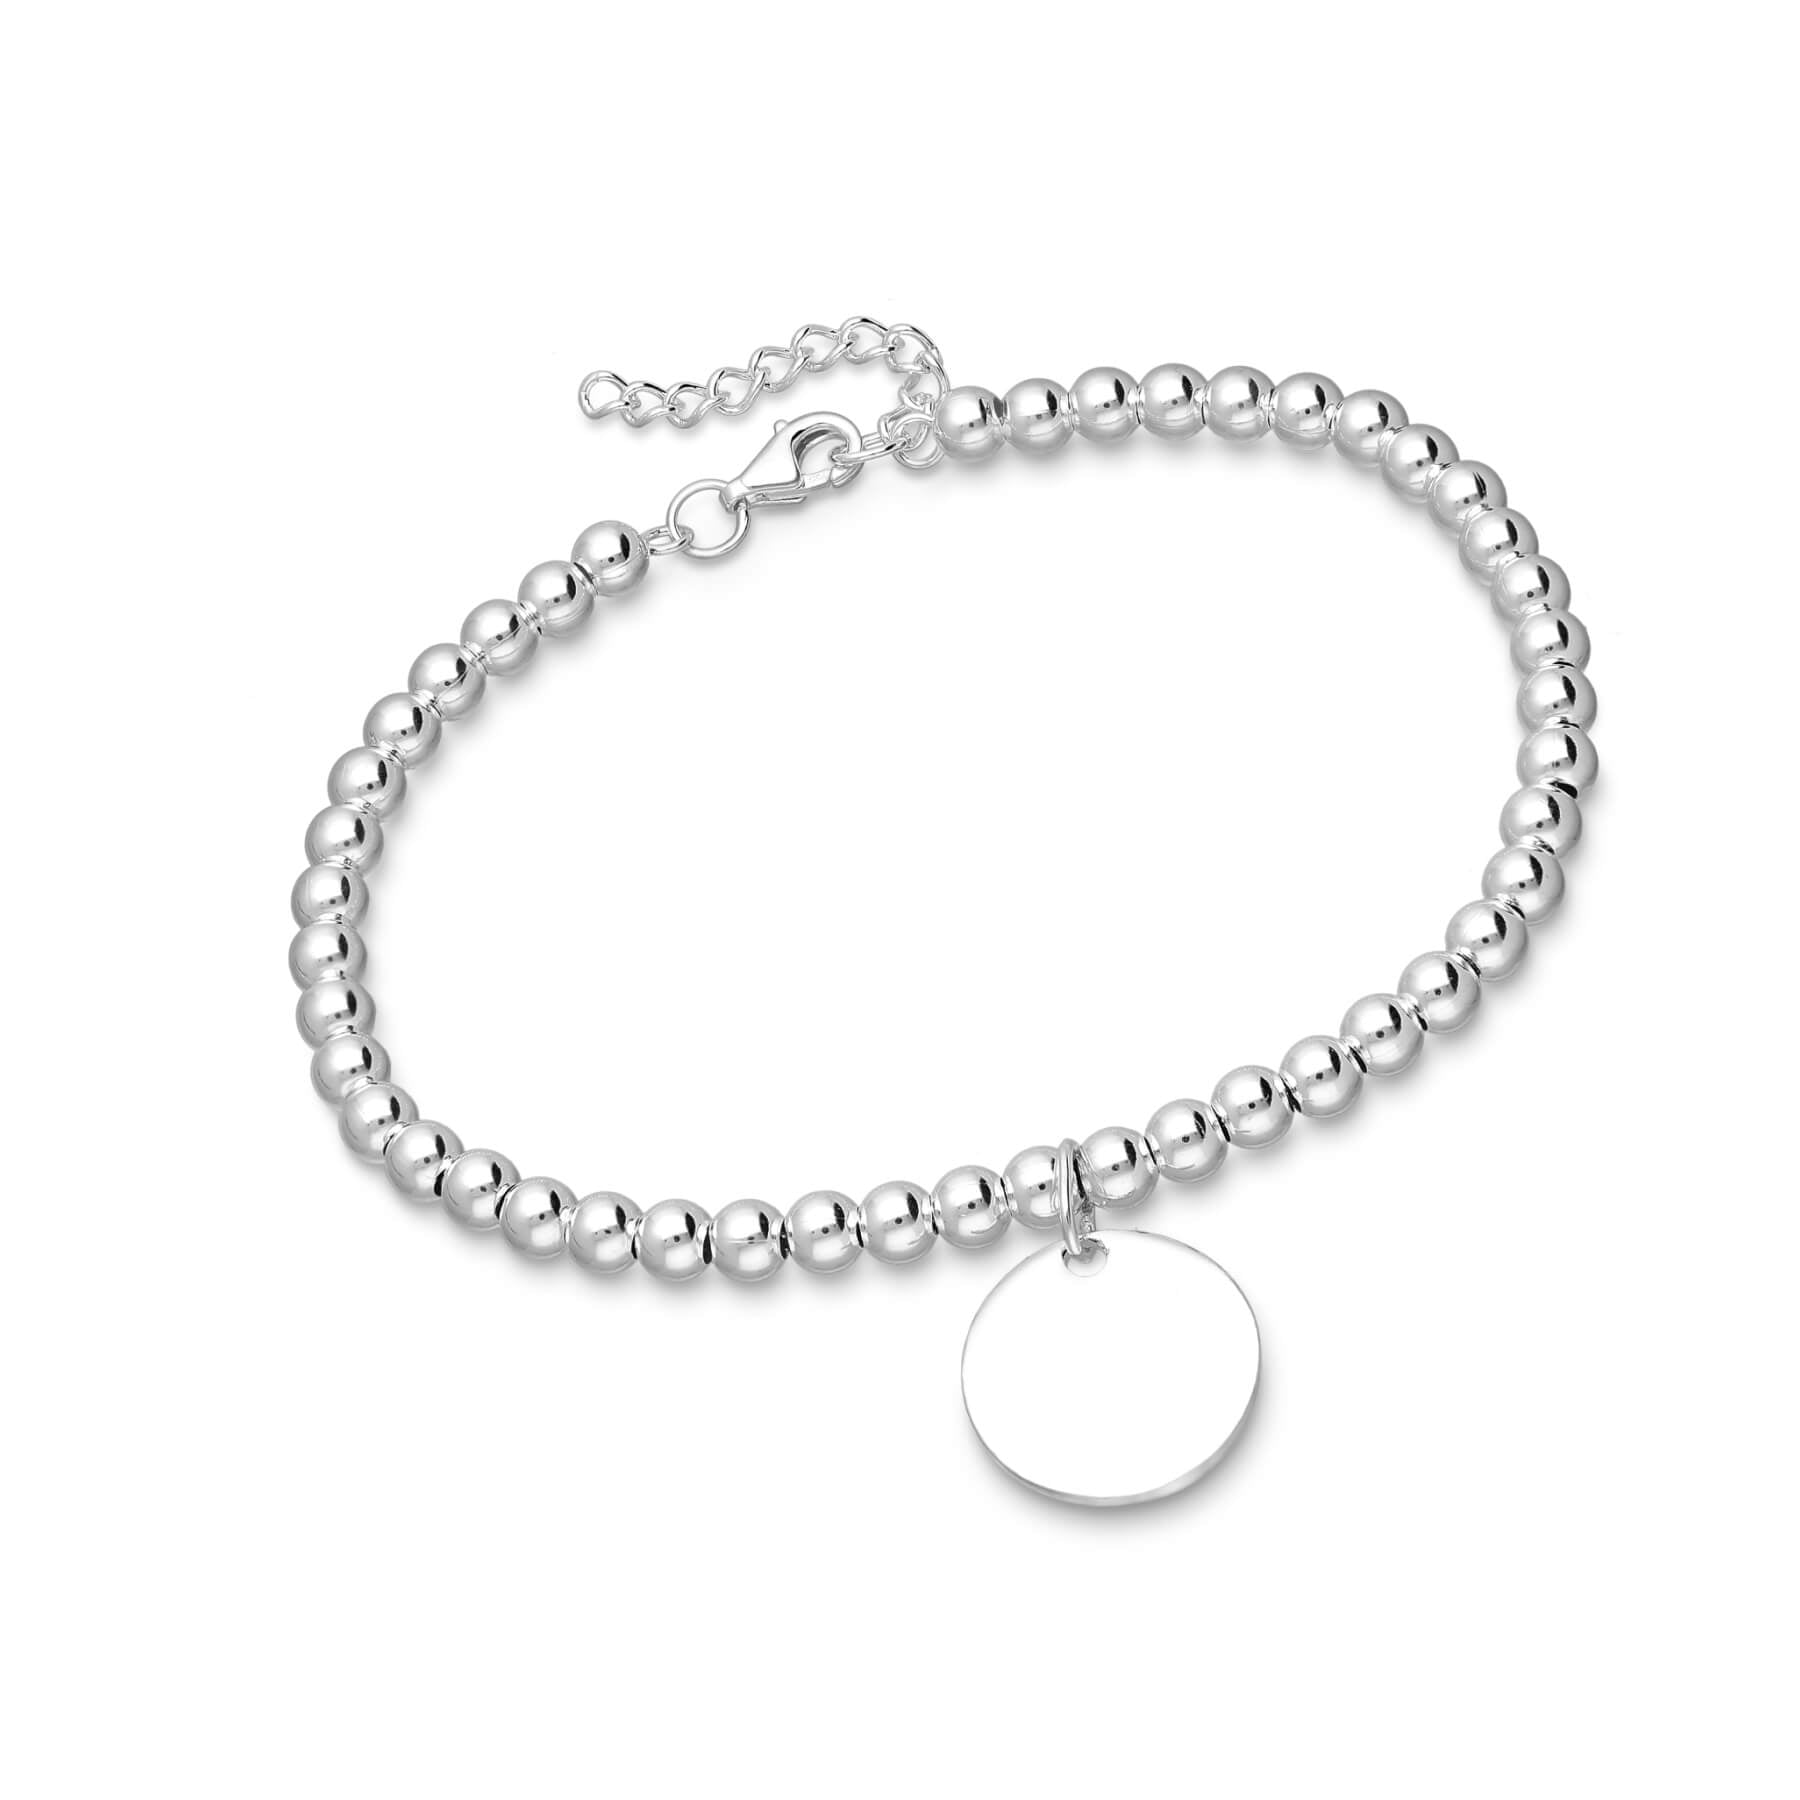 925 sterling silver engravable tag bracelet - tag can include school initials or symbol and graduating class year. 